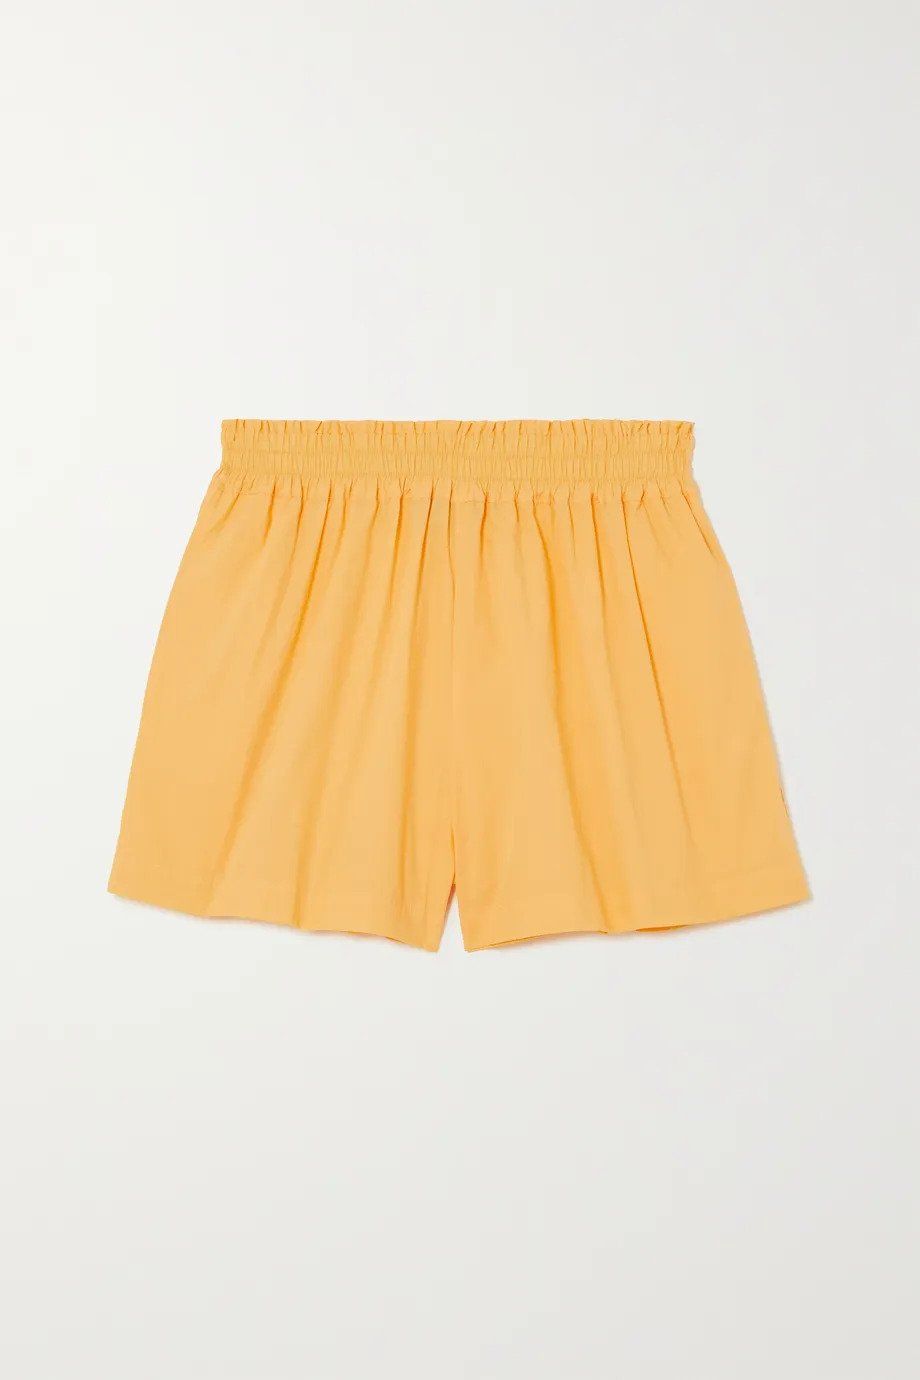 The 16 Prettiest Linen Shorts Sets for Women | Who What Wear